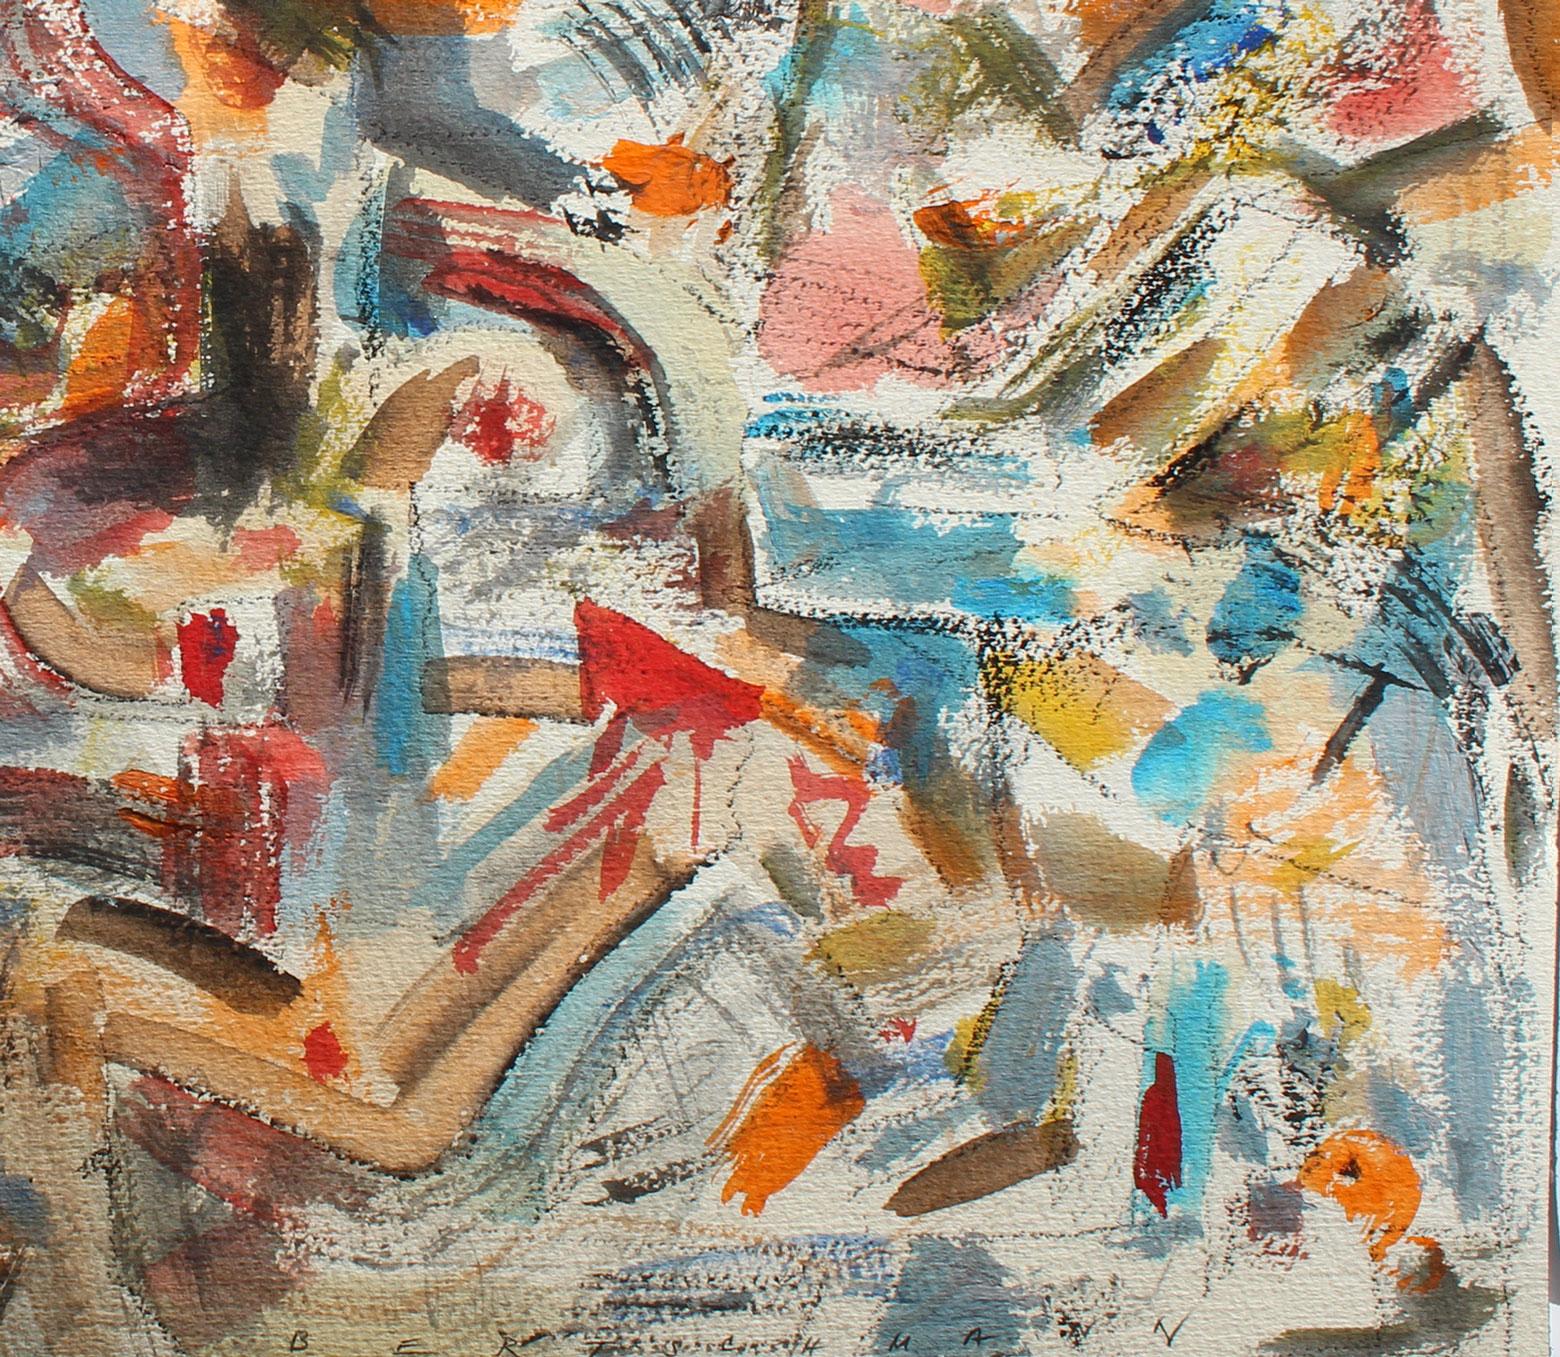  Abstract Expressionist Composition, 1990 - Painting by Harry Bertschmann